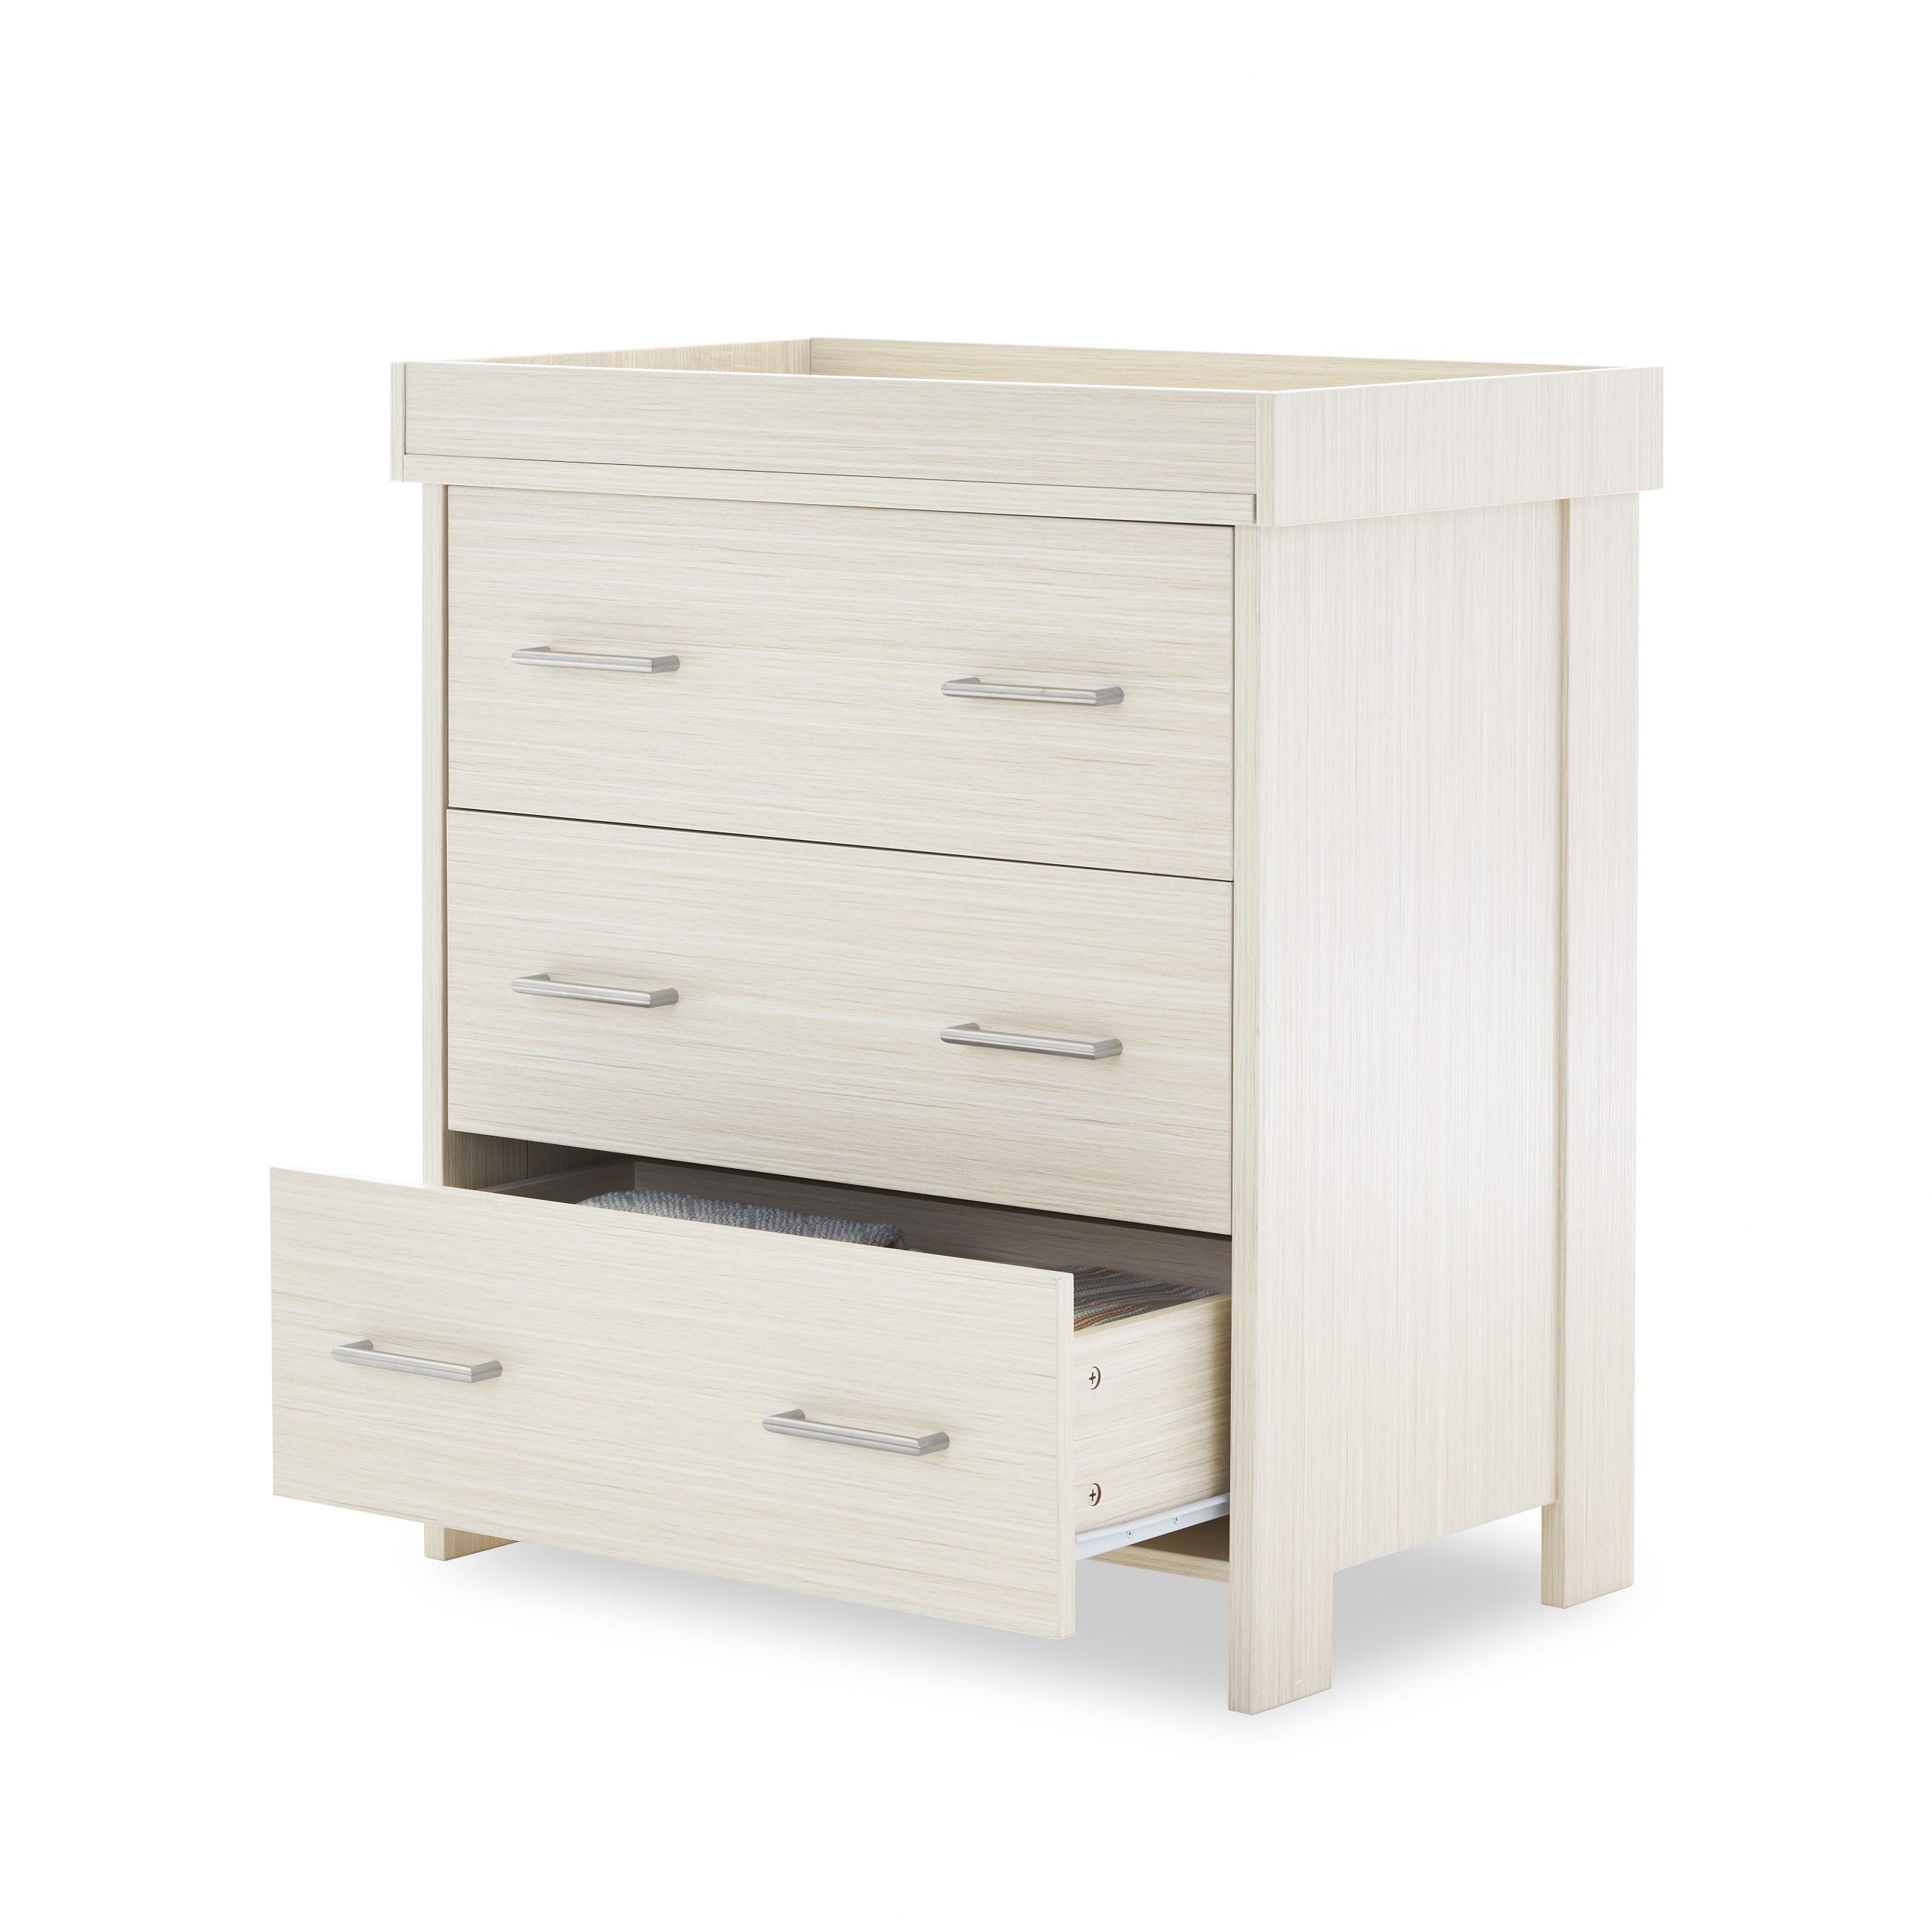 Obaby Nika Closed Changing Unit - Oatmeal